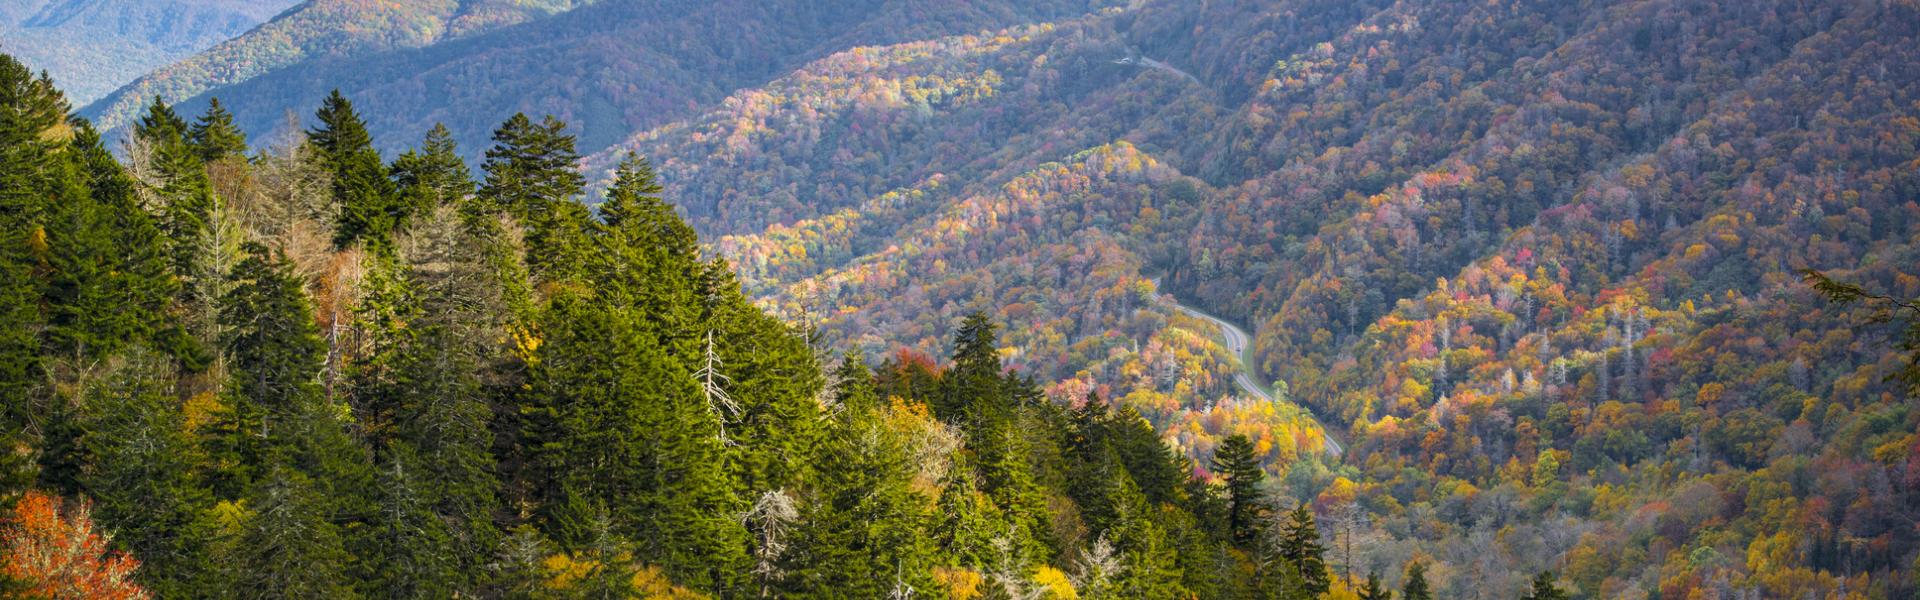 Holiday lettings & accommodation in Smoky Mountains - HomeToGo